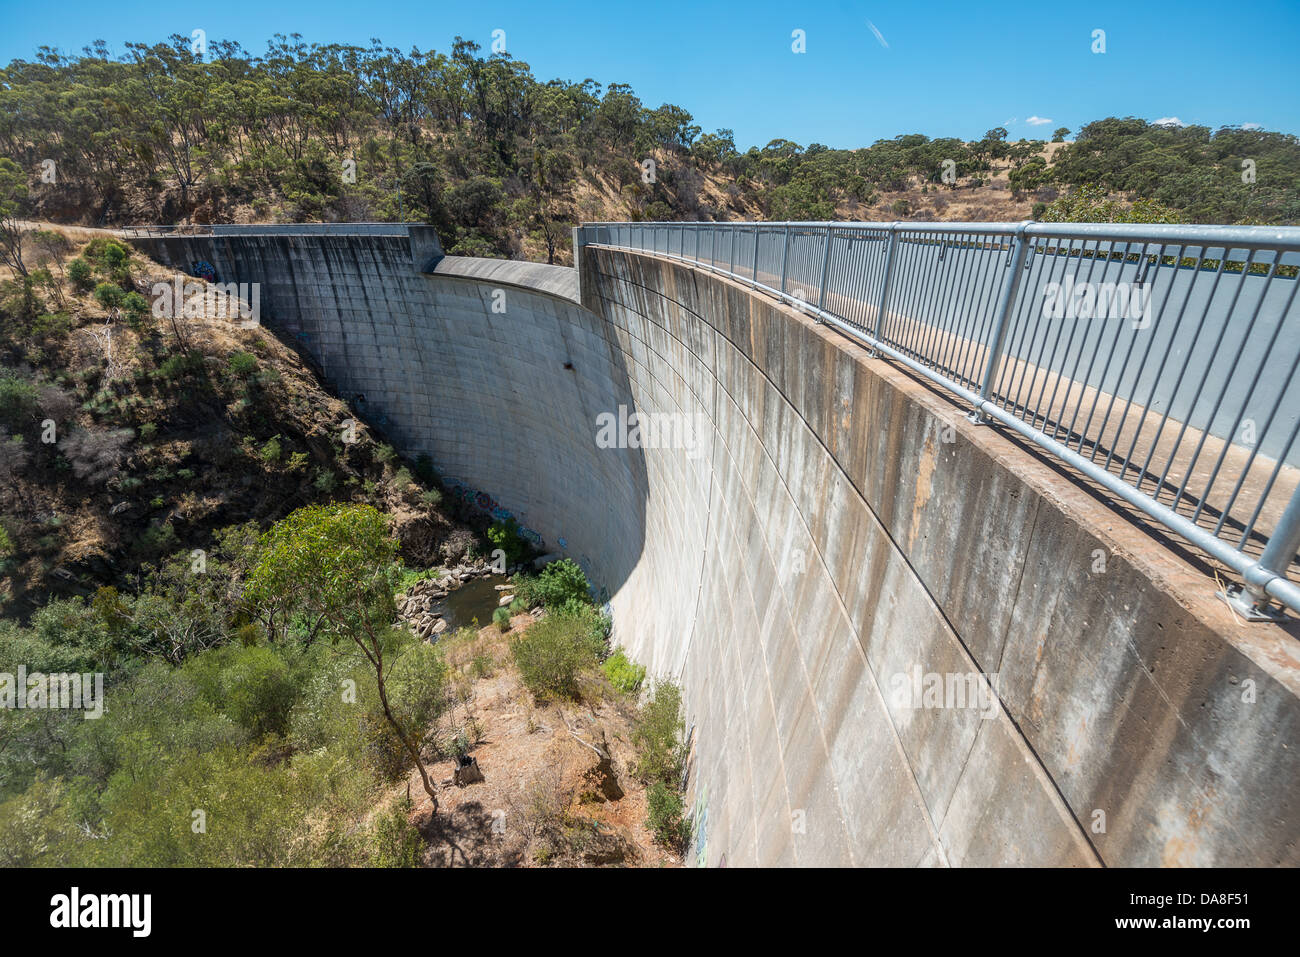 The Sturt Gorge flood control dam preventing major flooding events in the Sturt River. Stock Photo